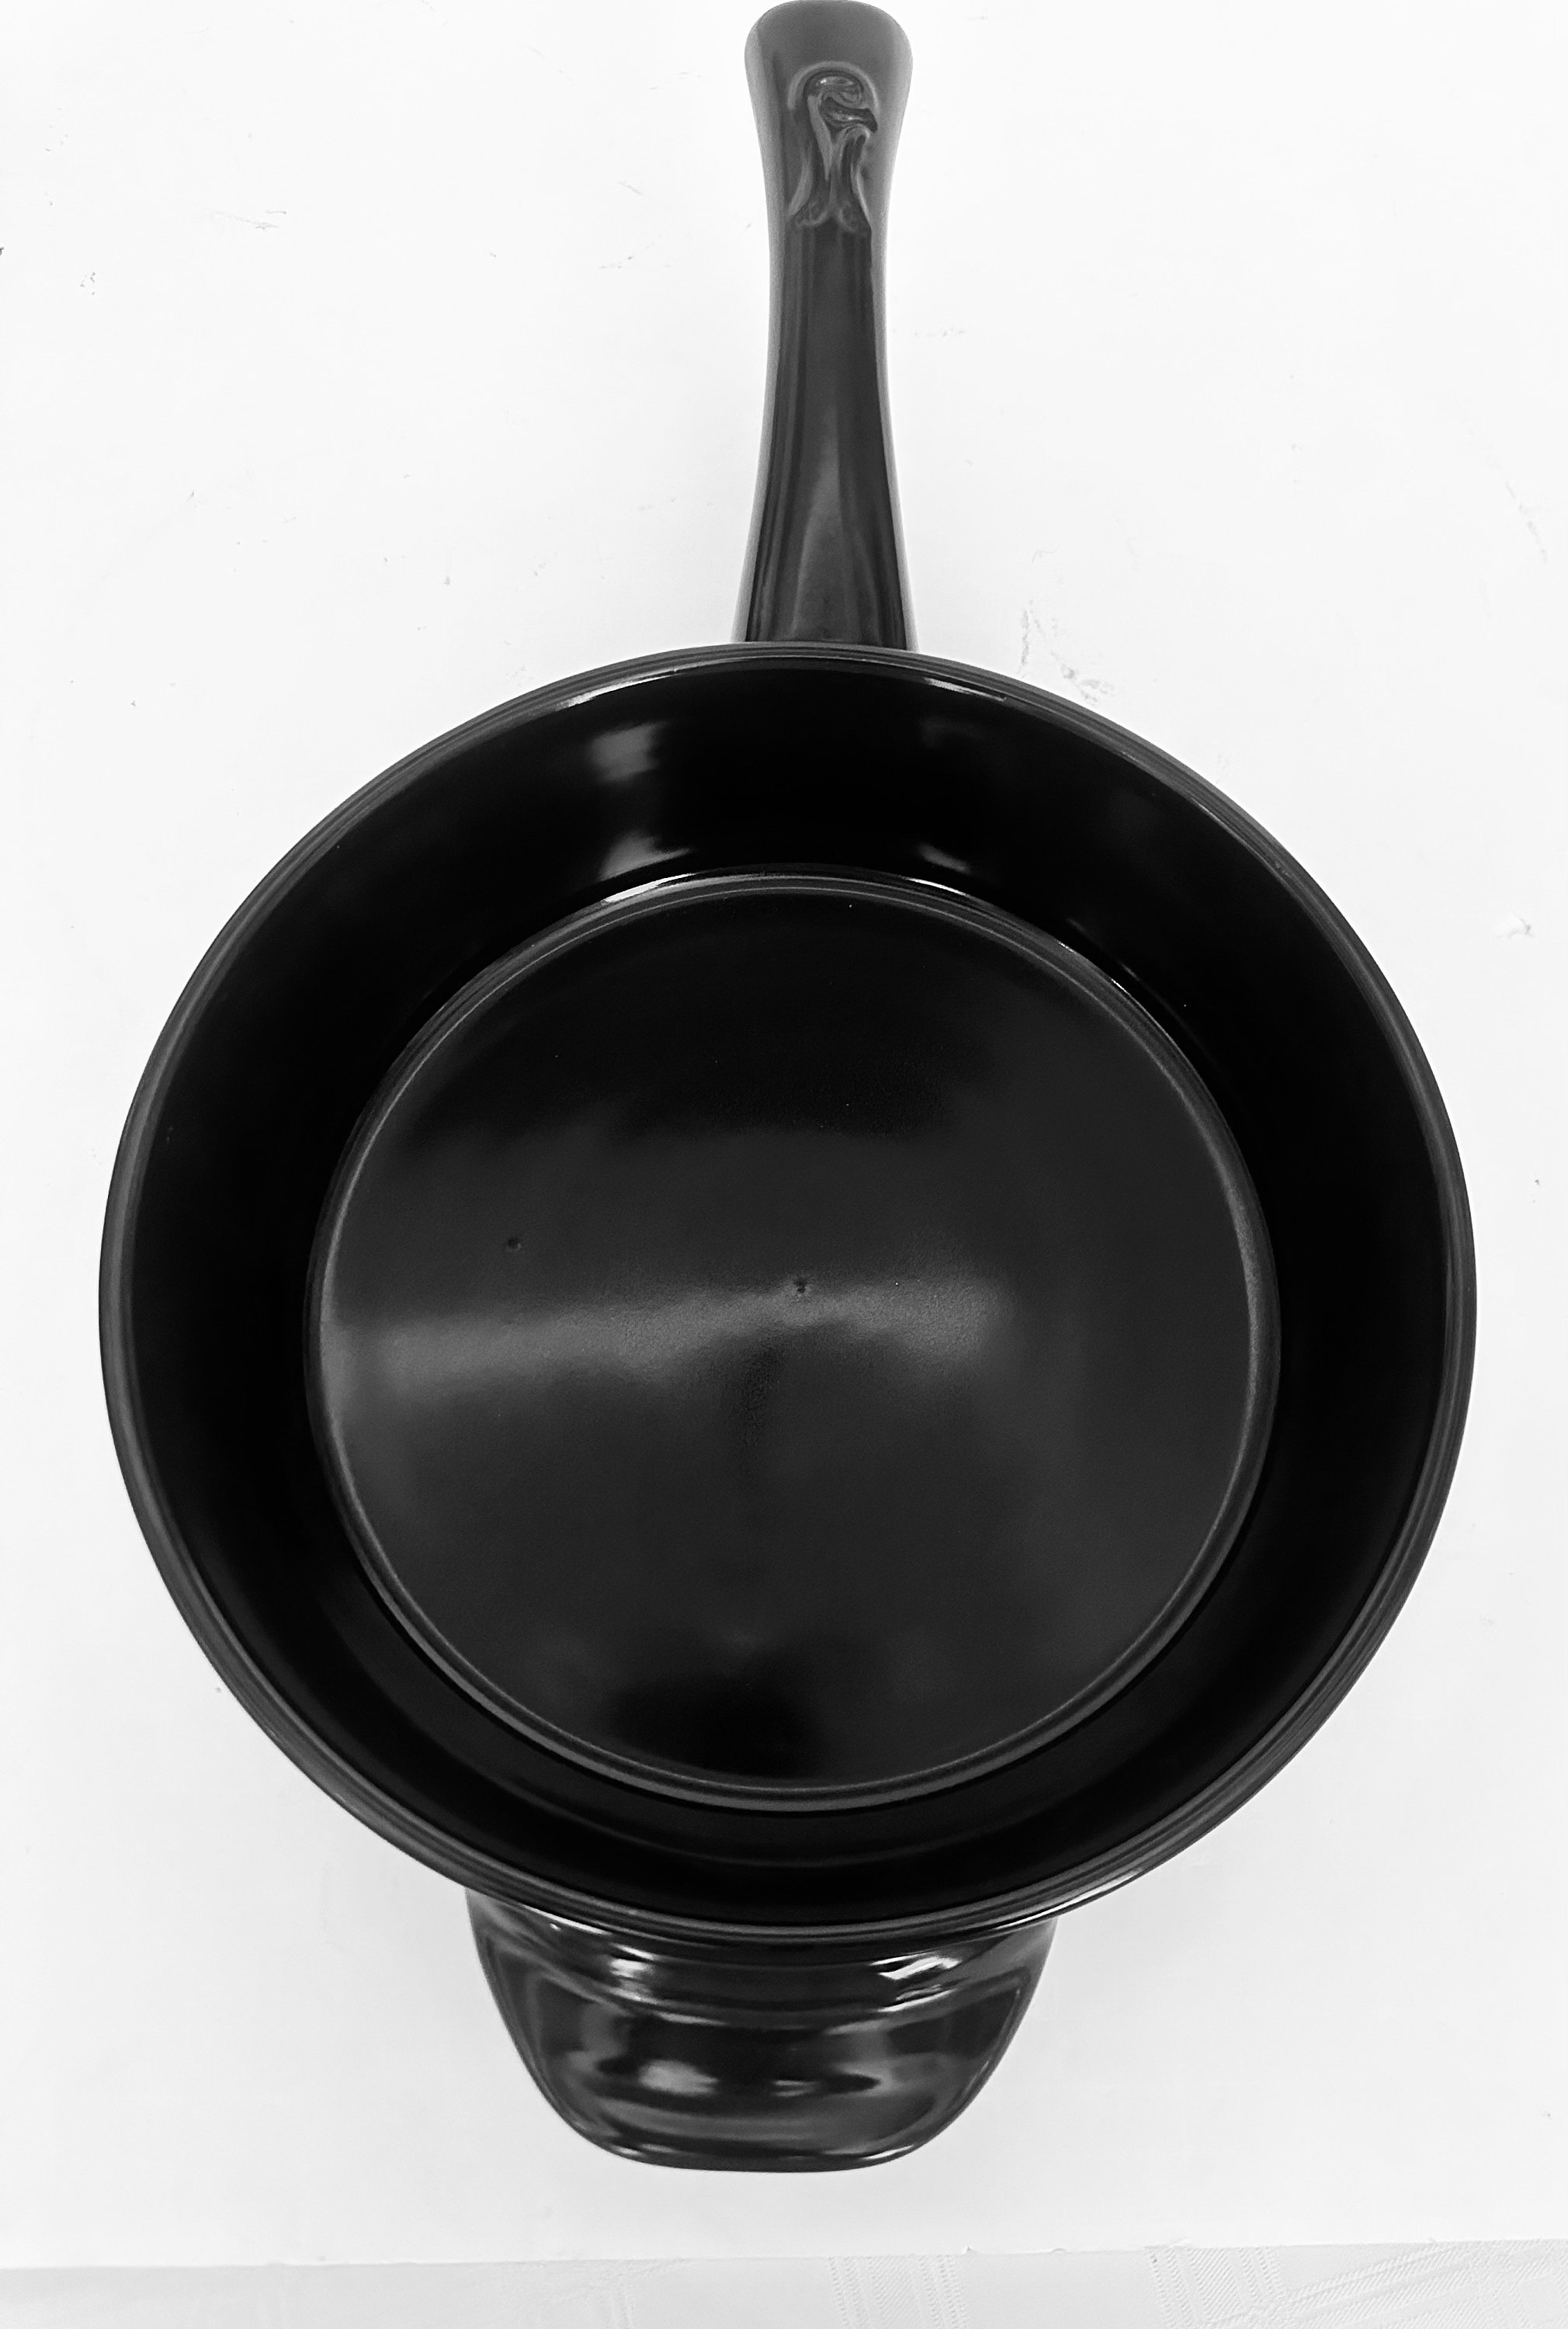 Xtrema 7 Traditions Saute Pan Lid Skillet Ceramic Cookware Black Oven  Microwave